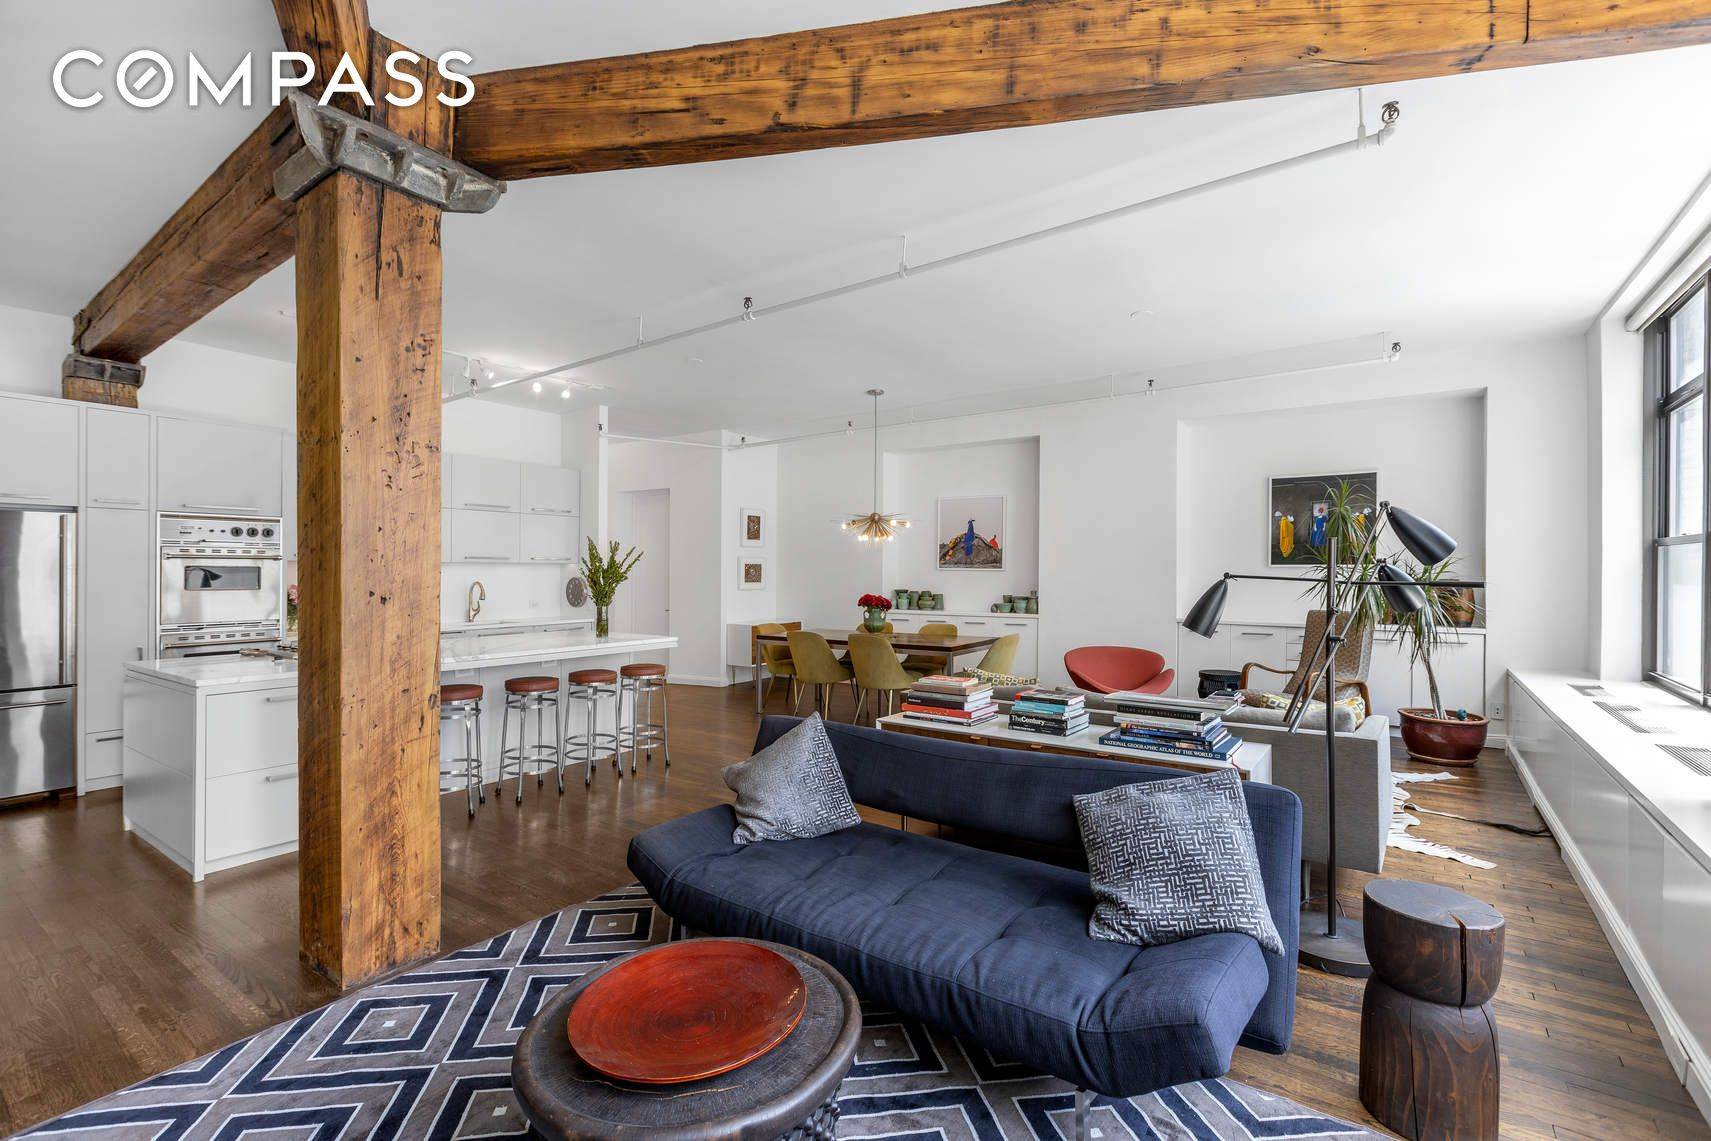 Perfectly situated on West 17th Street, this sun flooded, south facing home offers the rare opportunity to live in an authentic, sprawling loft on one of the best blocks in ...